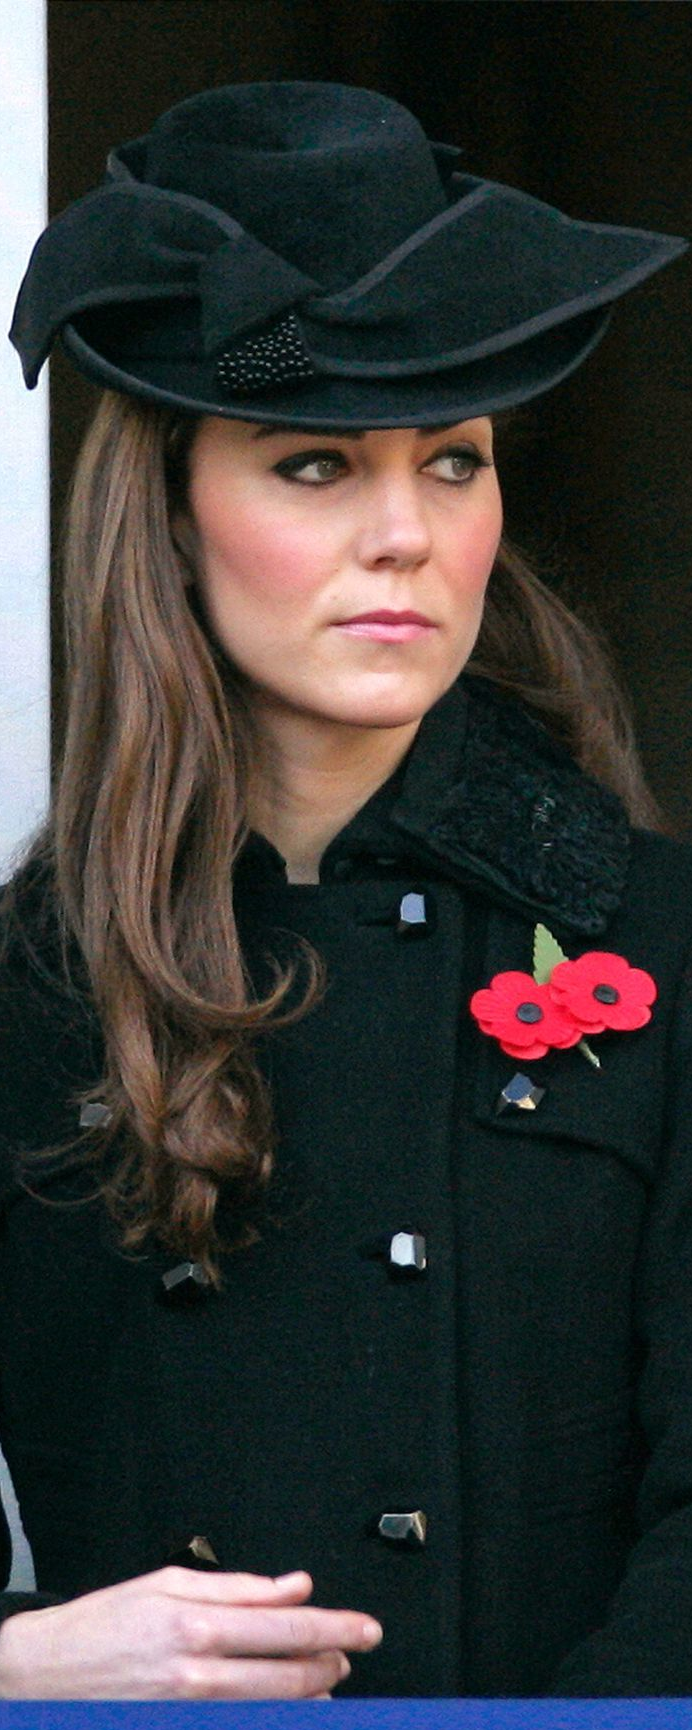 Jane Corbett Black Trilby Hat with Bow as seen on Kate Middleton, The Duchess of Cambridge.